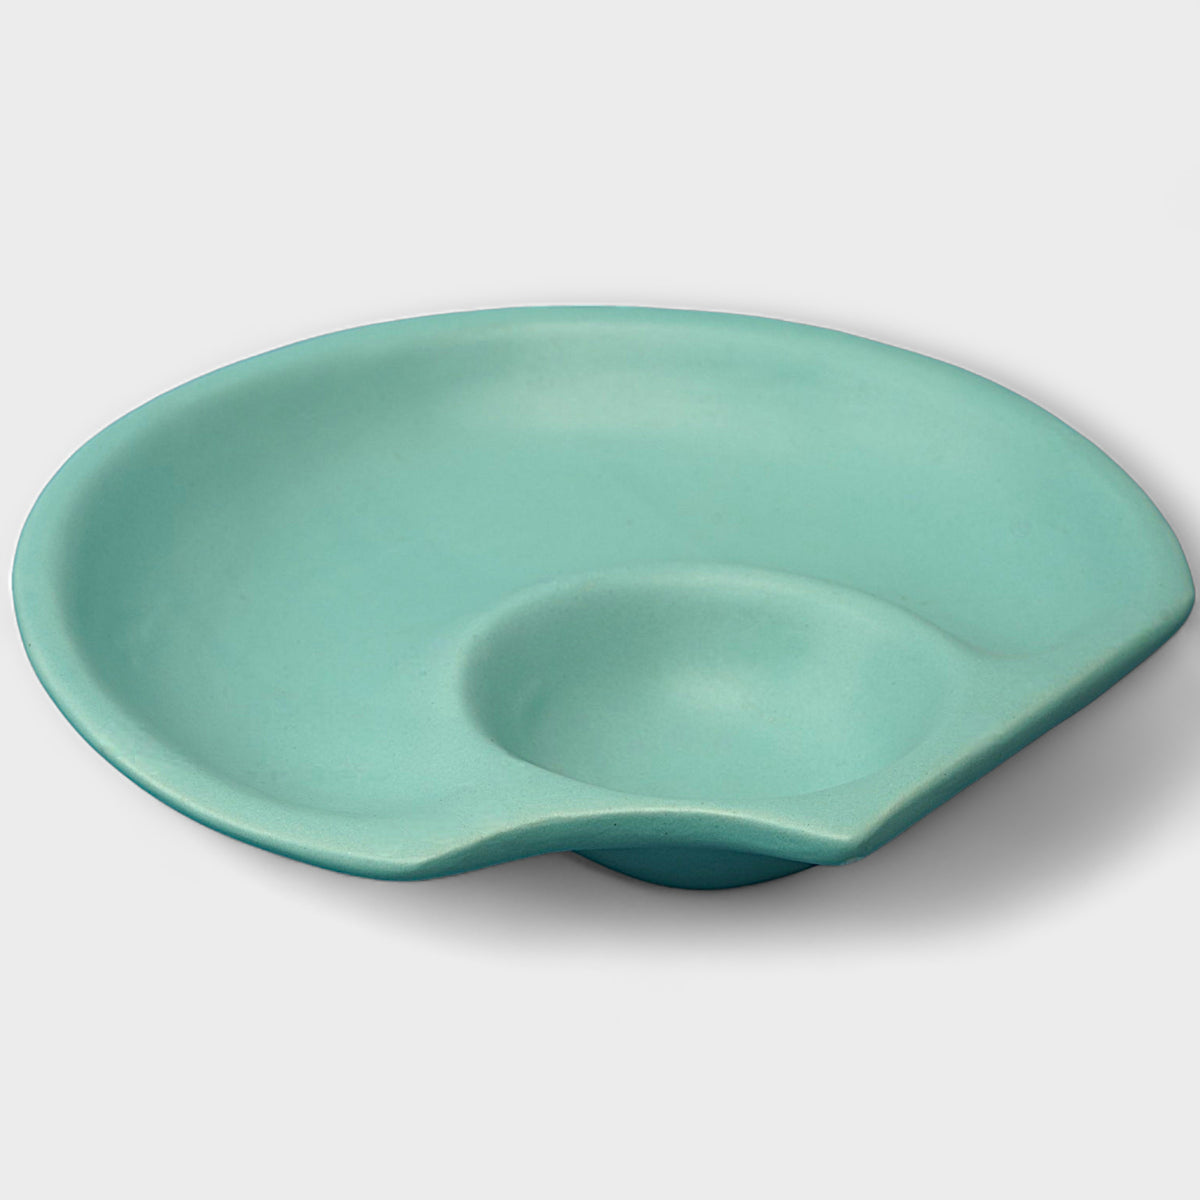 Claymistry Ceramic Snacks Teal Serving Plate with Dip Compartment, Set of 1 | 27cm * 27cm * 5cm | Matte Finish | Dishwasher & Microwave Safe | Dinnerware Serving Plate Thali | Premium Kitchen Crockery